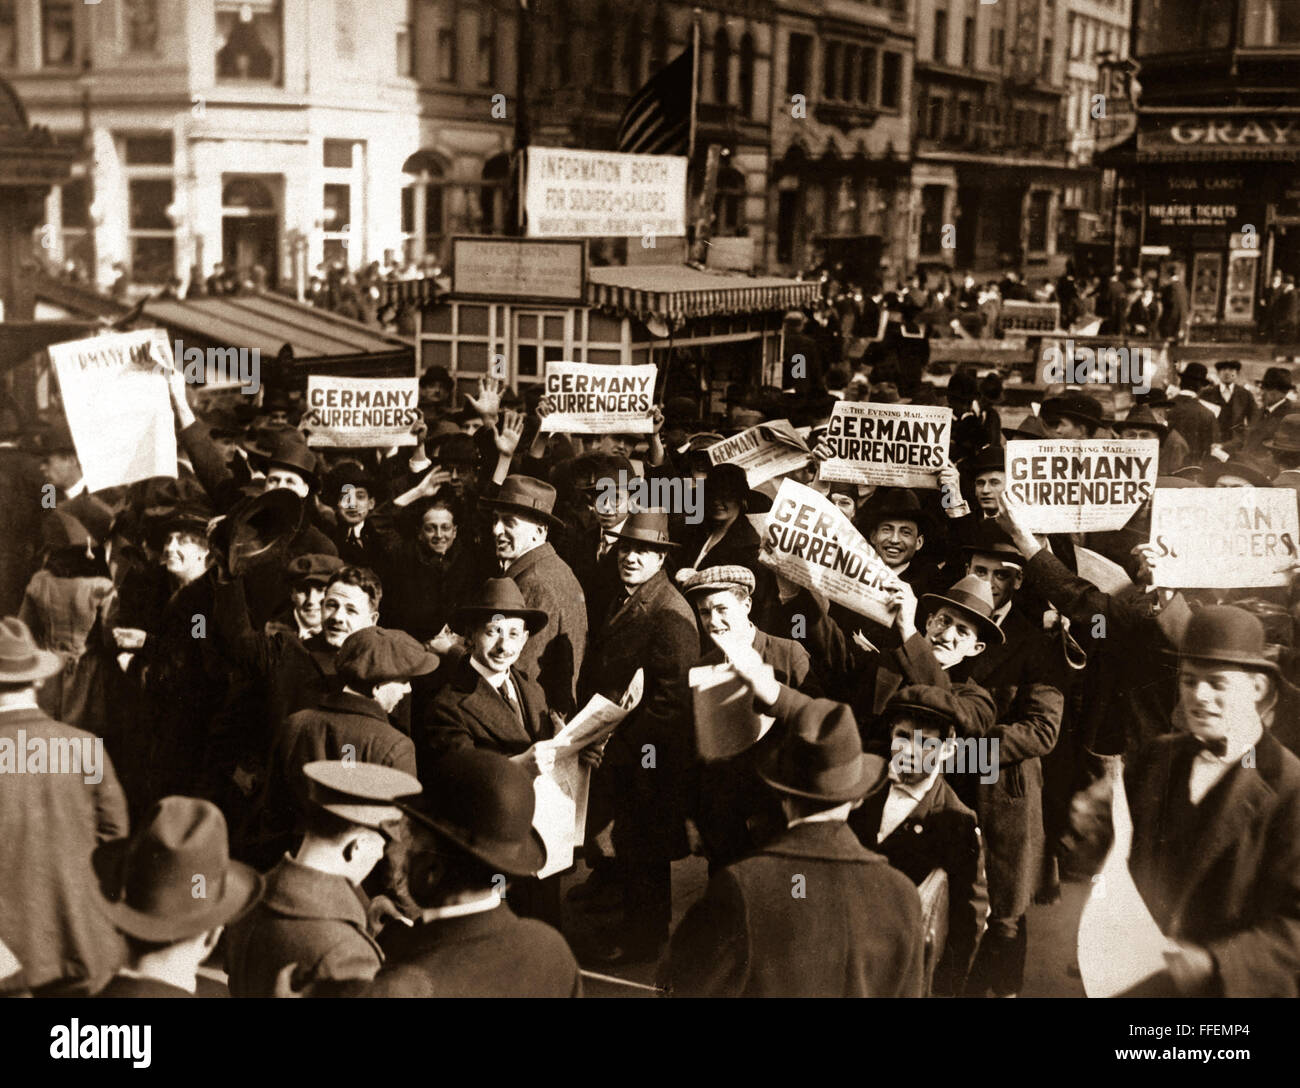 Peace rumor, New York.  Crowd at Times Square holding up Extras telling about the signing of the Armistice.  The Government report that the news was not true did not stop the celebration.  November 7, 1918.  Photograph by The Western Newspaper Union    This archival print is available in the following sizes:    8' x 10'   $15.95 w/ FREE SHIPPING  11' x 14' $23.95 w/ FREE SHIPPING  16' x 20' $59.95 w/ FREE SHIPPING  20' x 24' $99.95 w/ FREE SHIPPING    * The American Photoarchive watermark will not appear on your print. Stock Photo